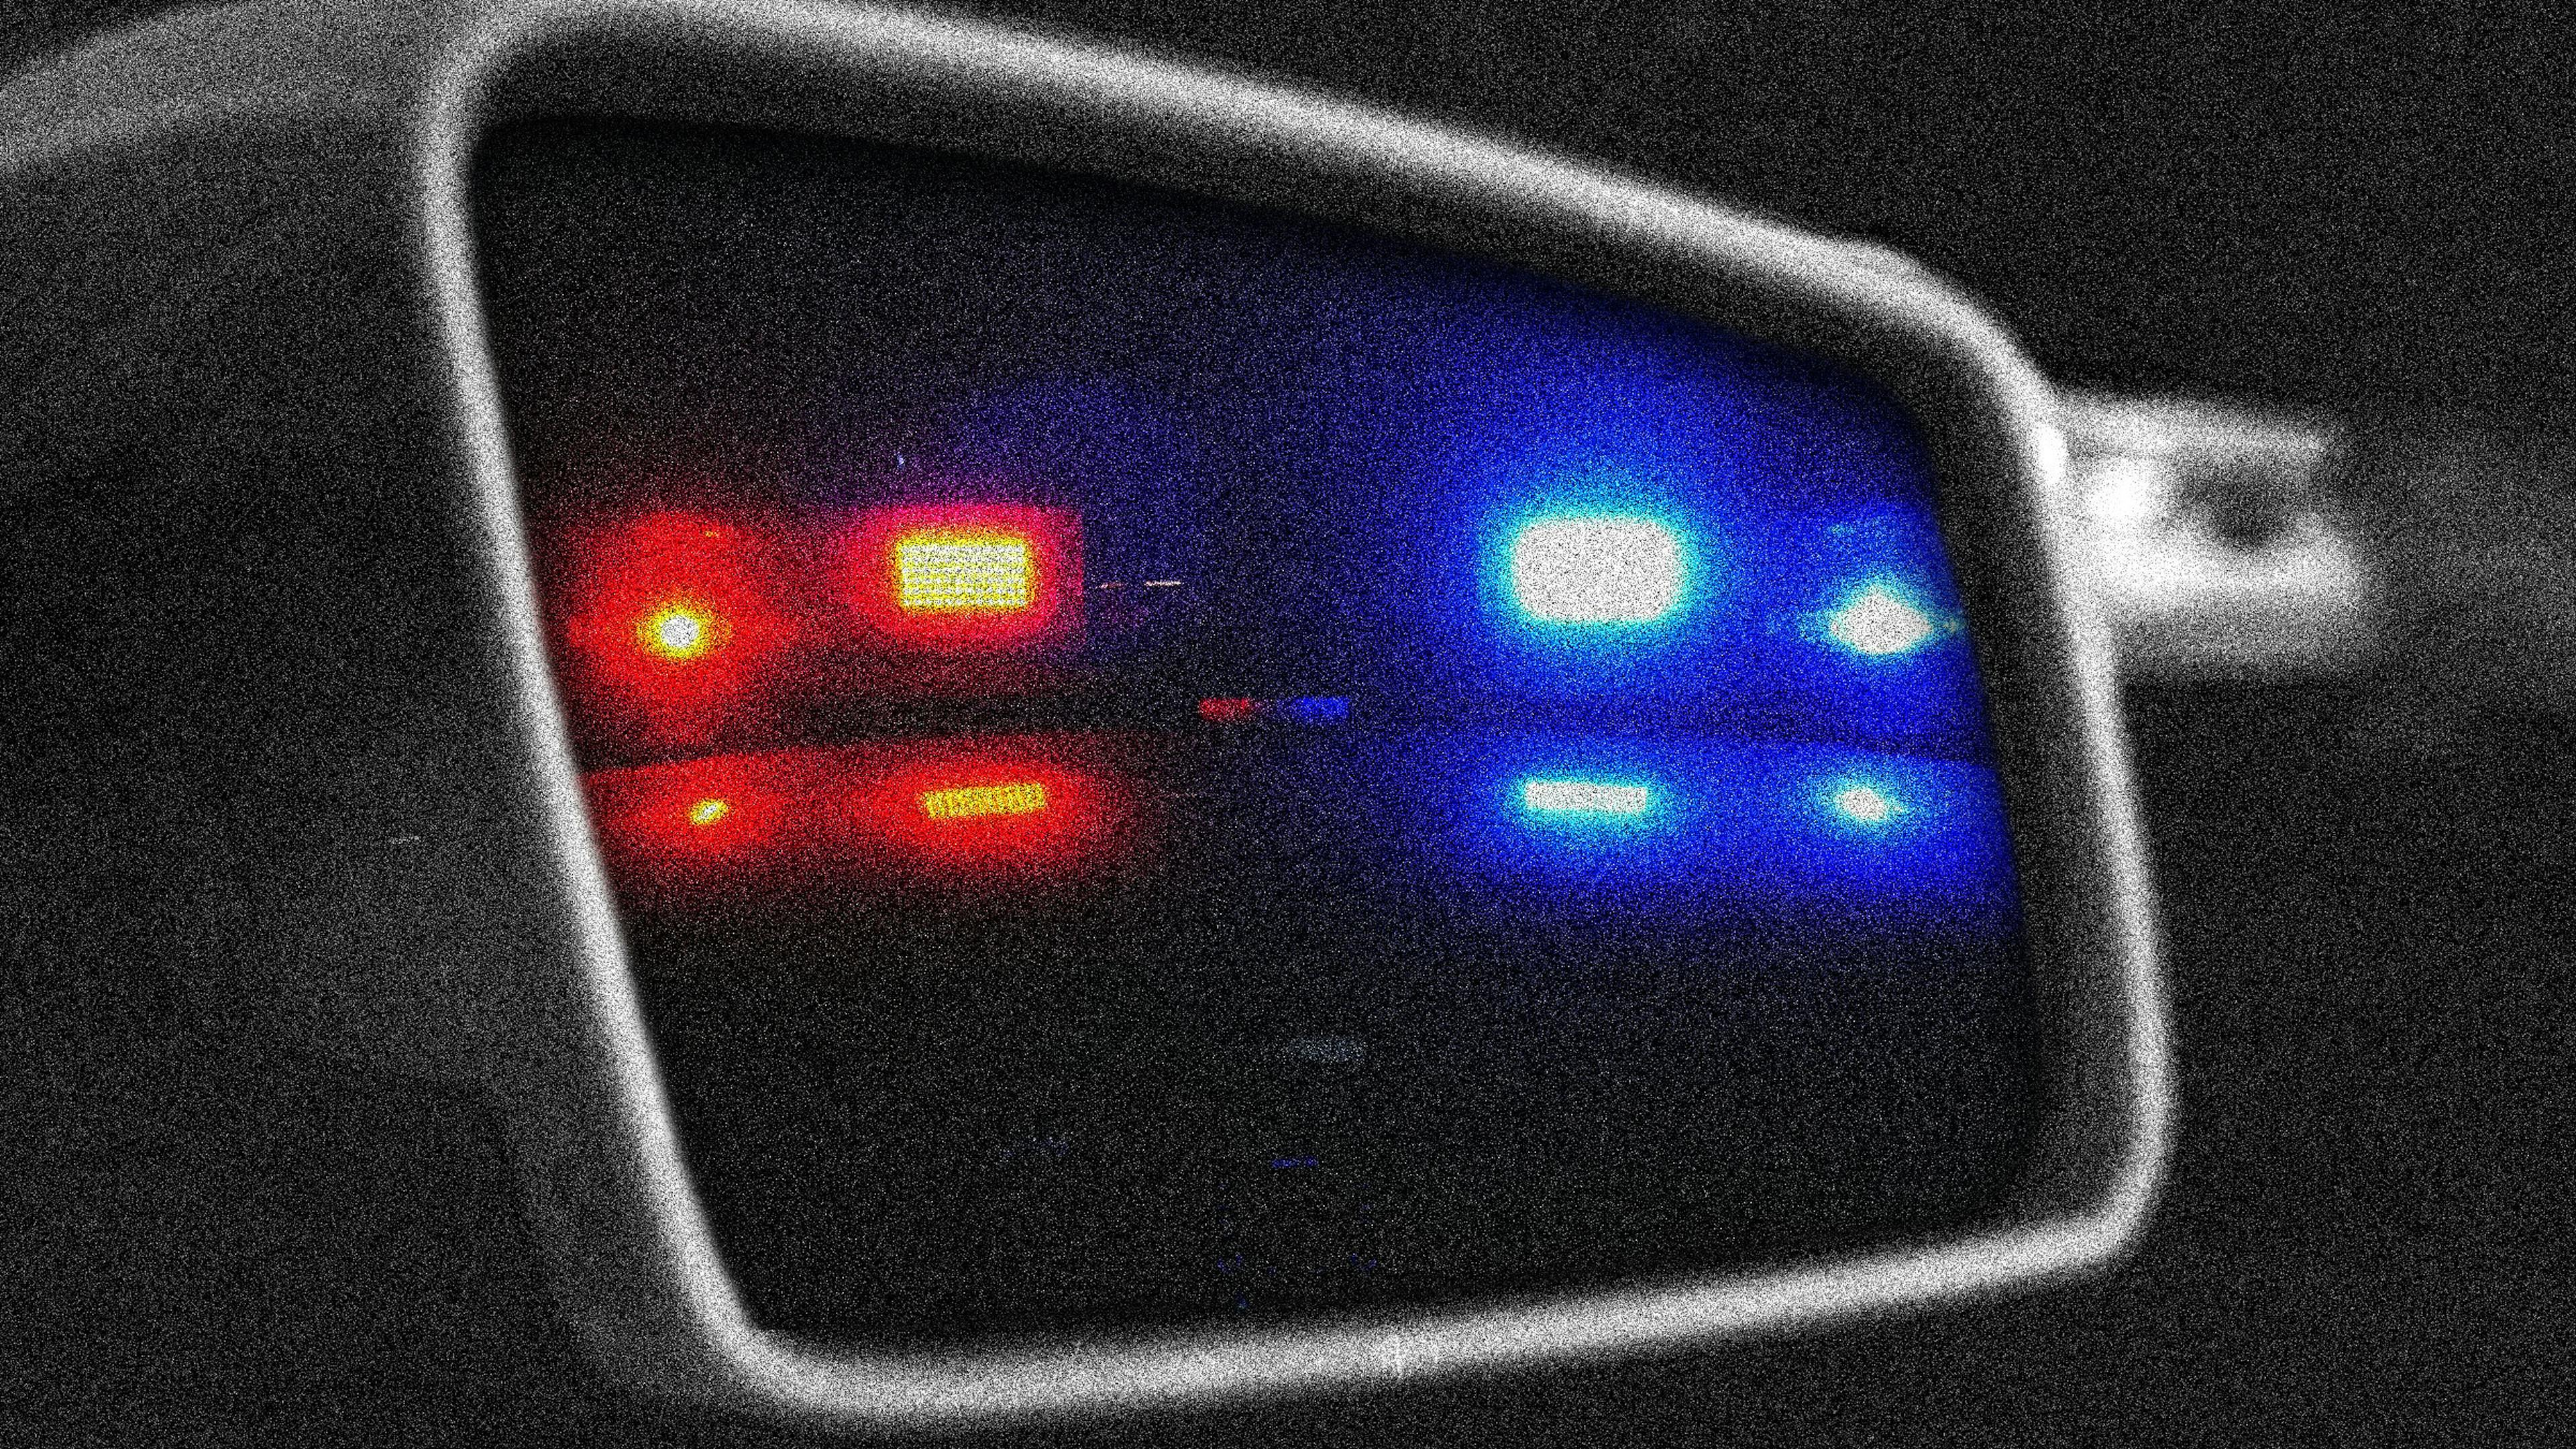 10 Anti-Authority Anthems To Blast When You Get Pulled Over